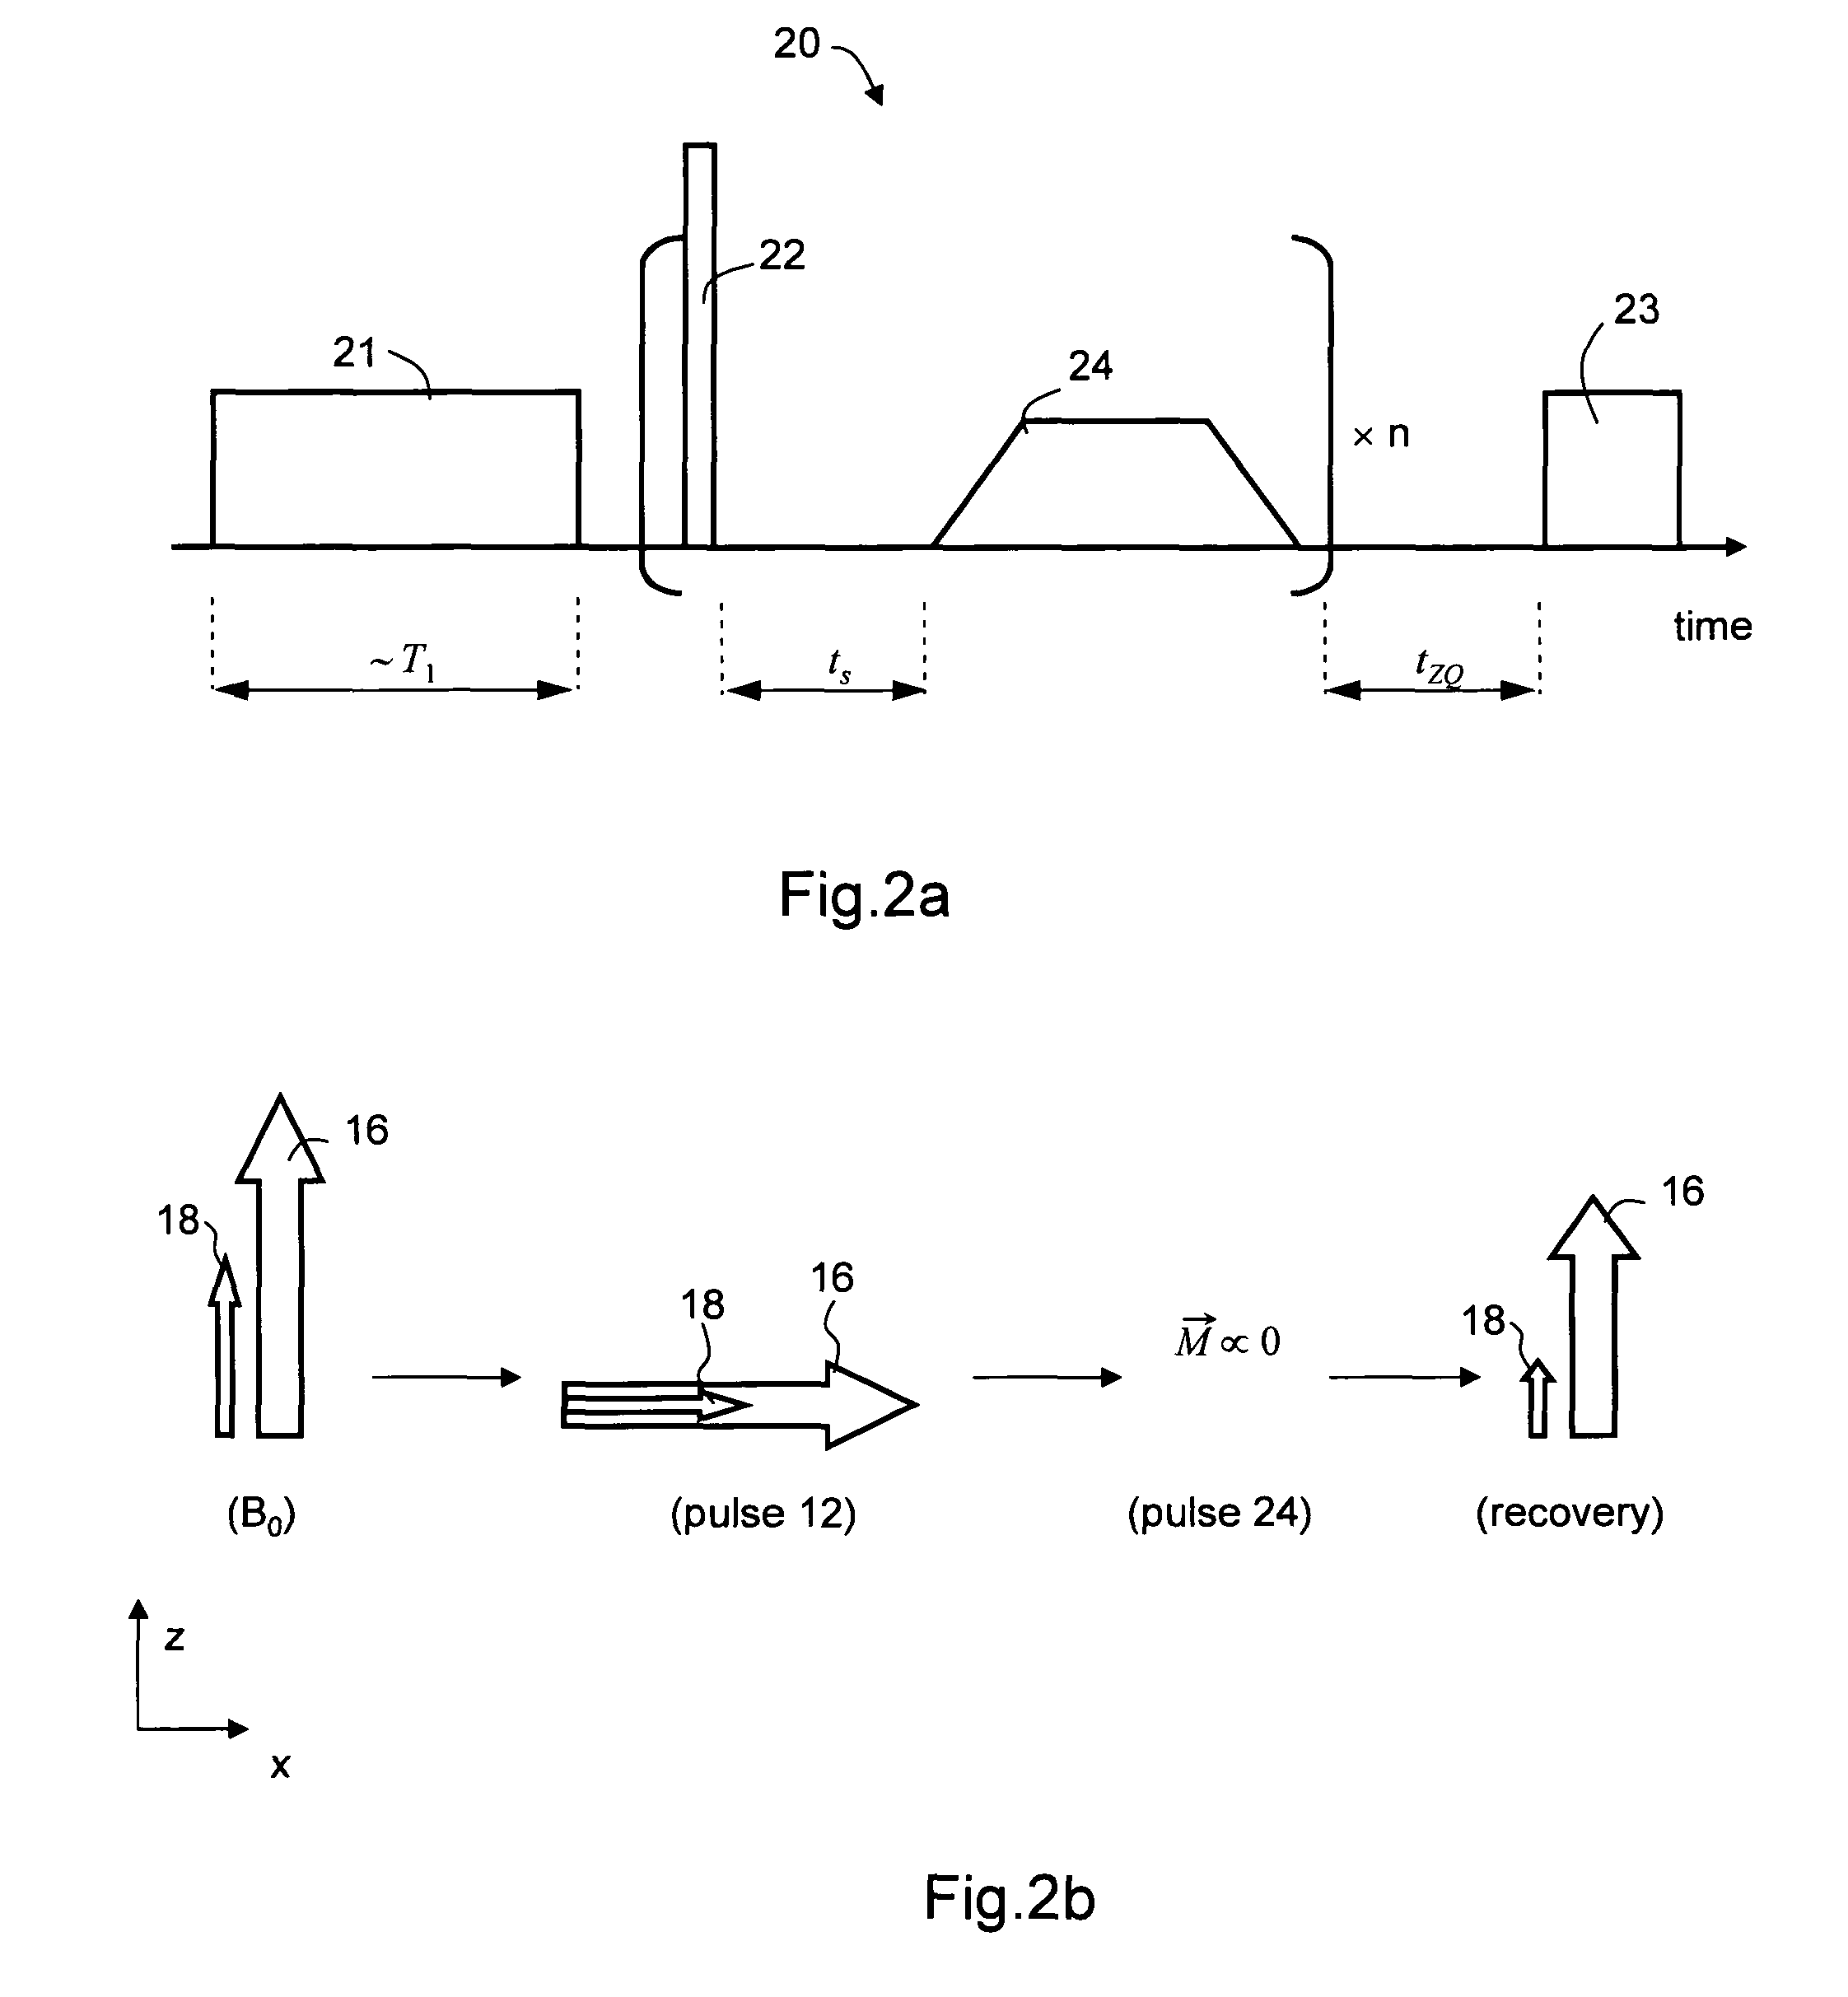 Method, apparatus and system for magnetic resonance analysis based on water magnetization transferred from other molecules